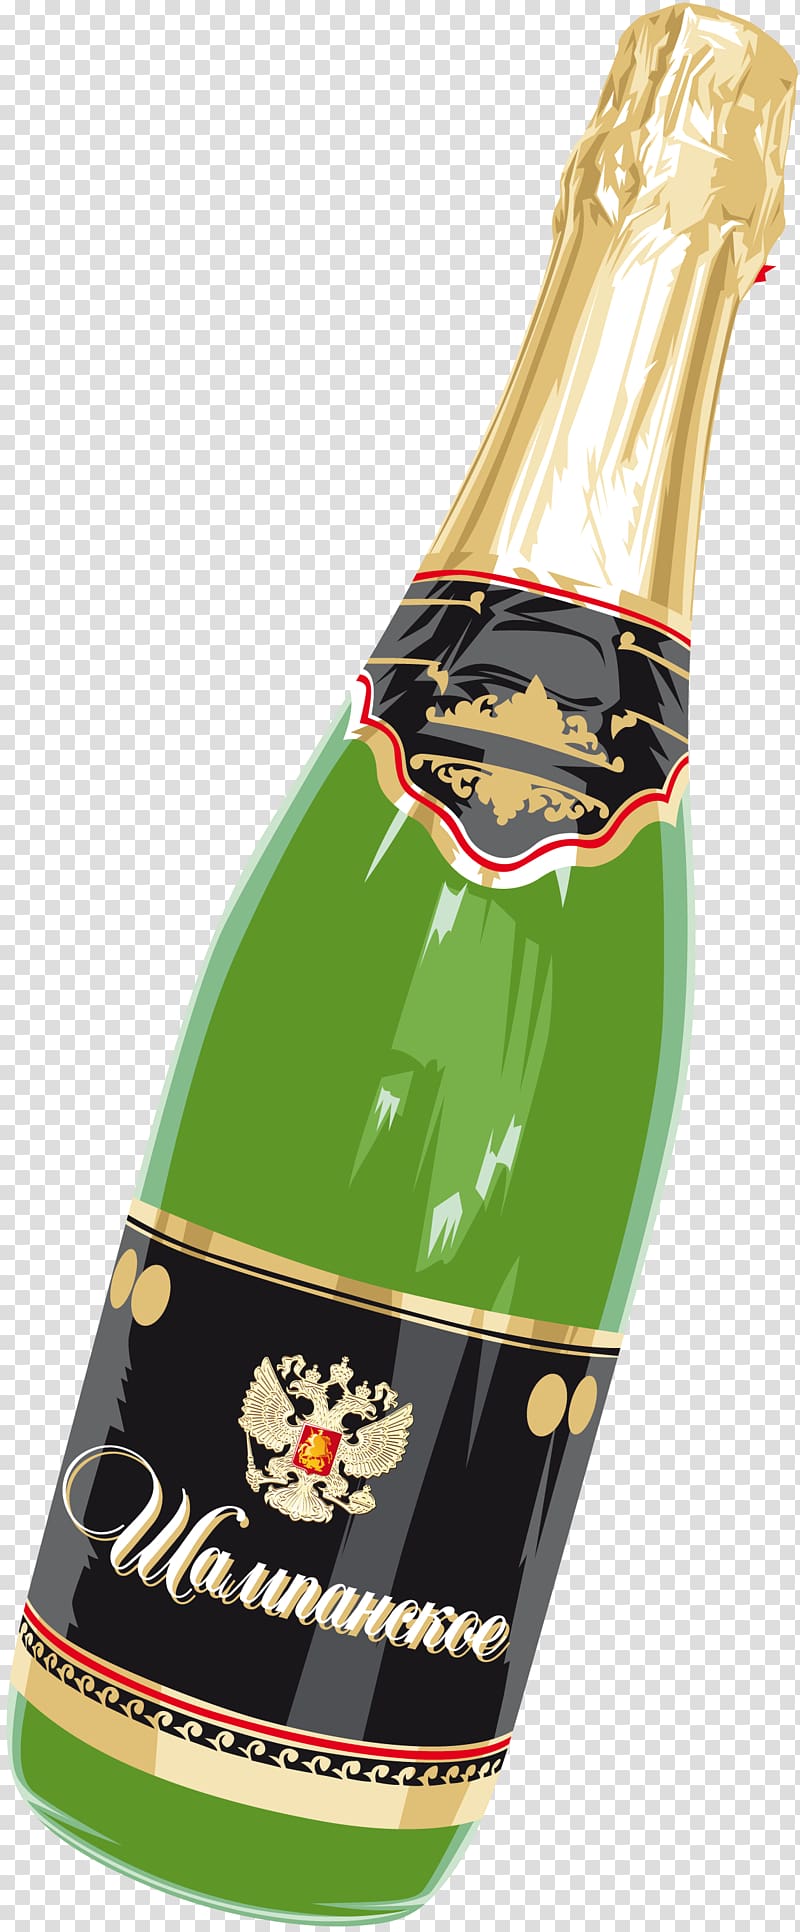 Champagne Wine Bottle Alcoholic drink Birthday, champagne bottle transparent background PNG clipart